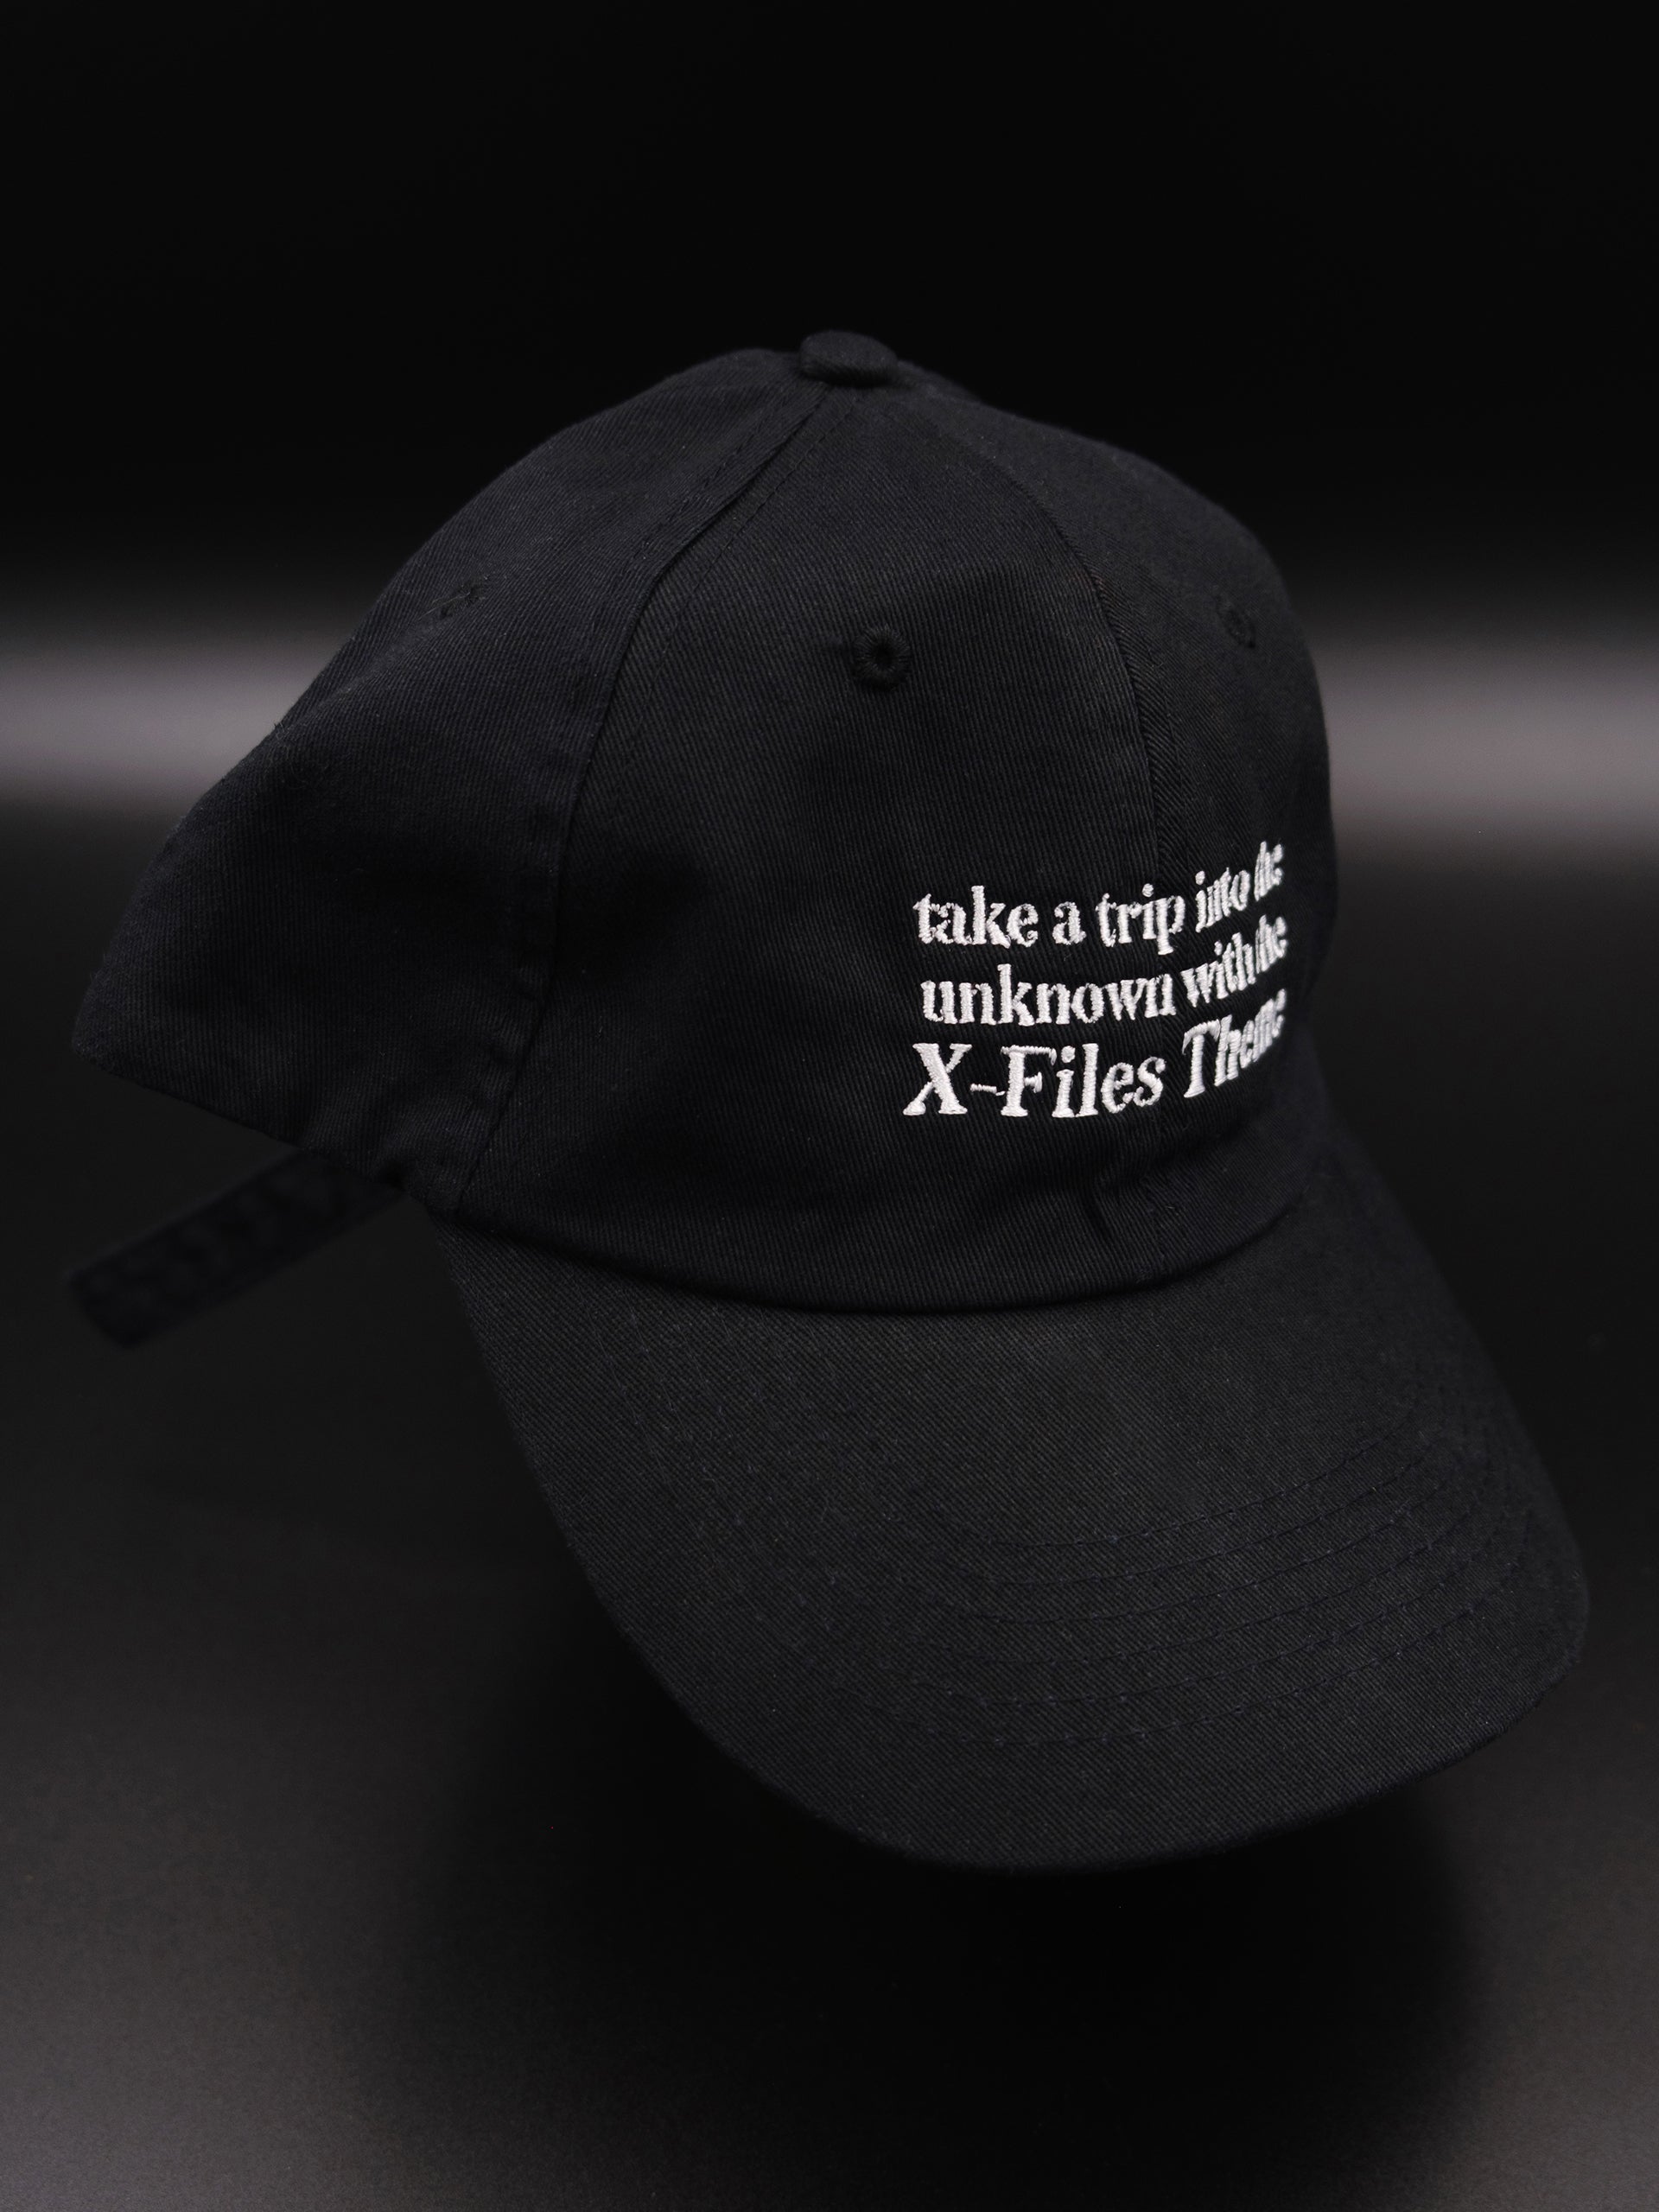 black hat with white embroidered text reads "take a trip into the unknown with the X-Files theme"